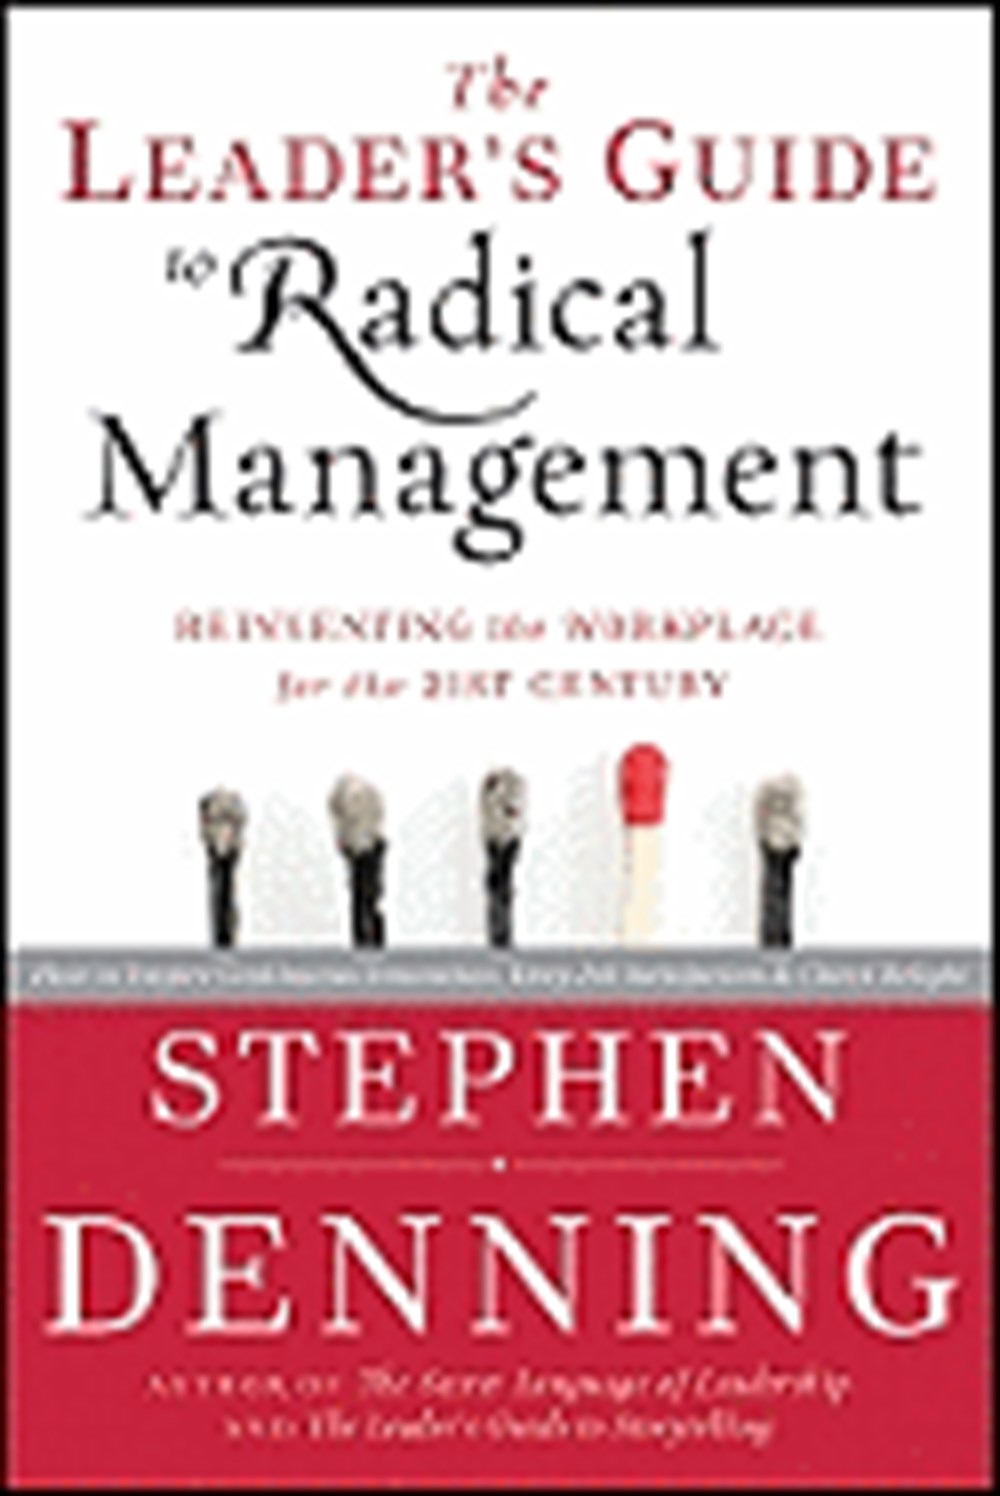 Leader's Guide to Radical Management Reinventing the Workplace for the 21st Century